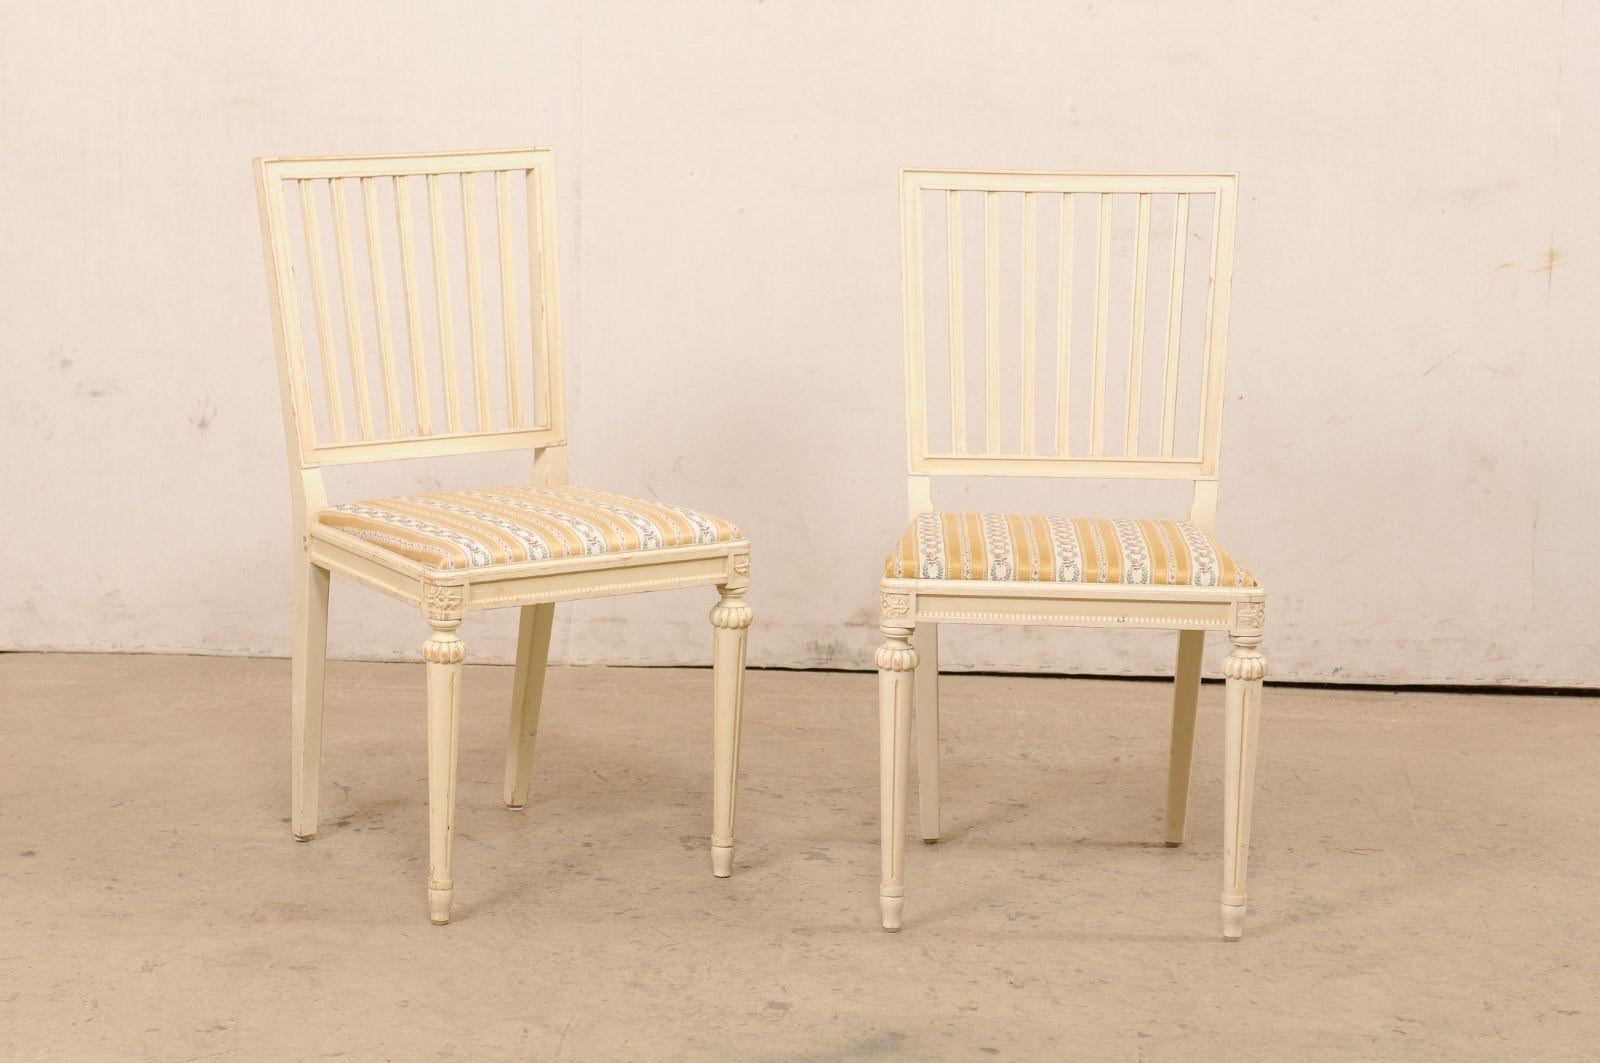 A Swedish set of six side chairs, with their original finish, from the mid 20th century. This vintage set of chairs from Sweden each have squared open slat-backs, upholstered seats, and cleanly designed seat rails with delicate petite bead trimming